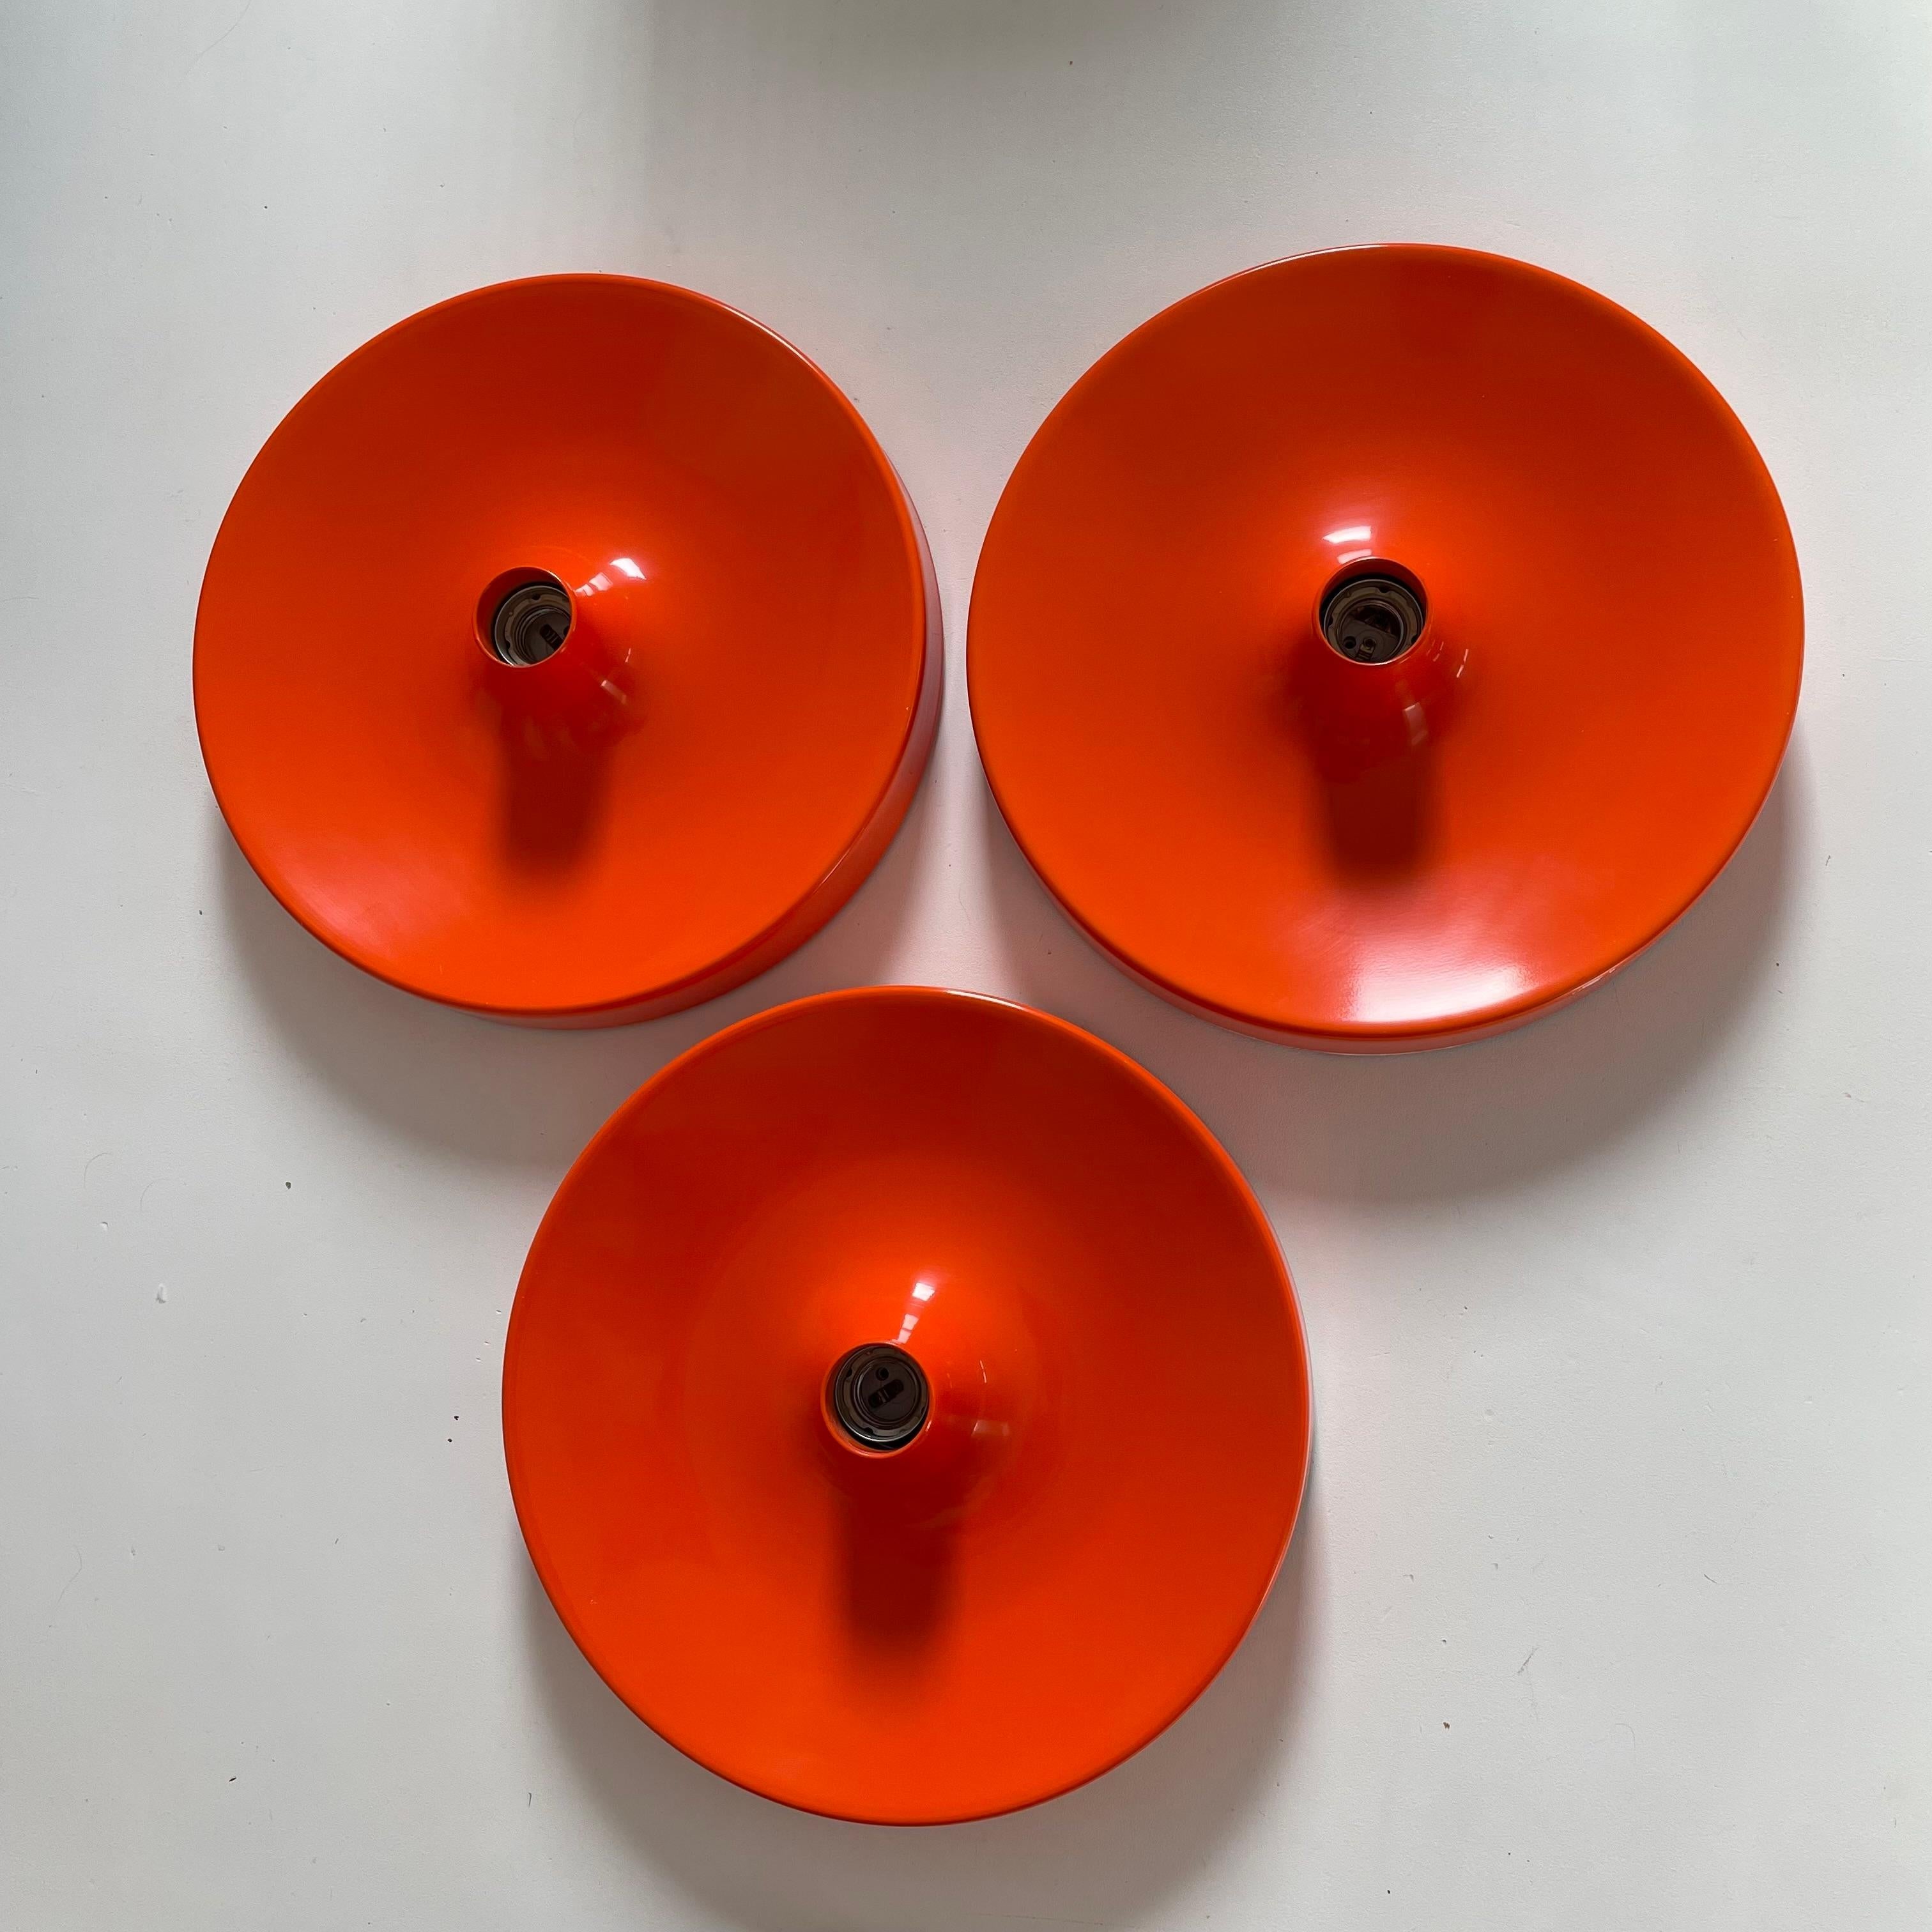 Article:

Wall light sconce set of 3


Producer:

Staff lights



Origin:

Germany



Age:

1970s



Description:

Original 1970s modernist German wall light made of solid metal aluminium. This super rare wall light was produced in the 1970s by